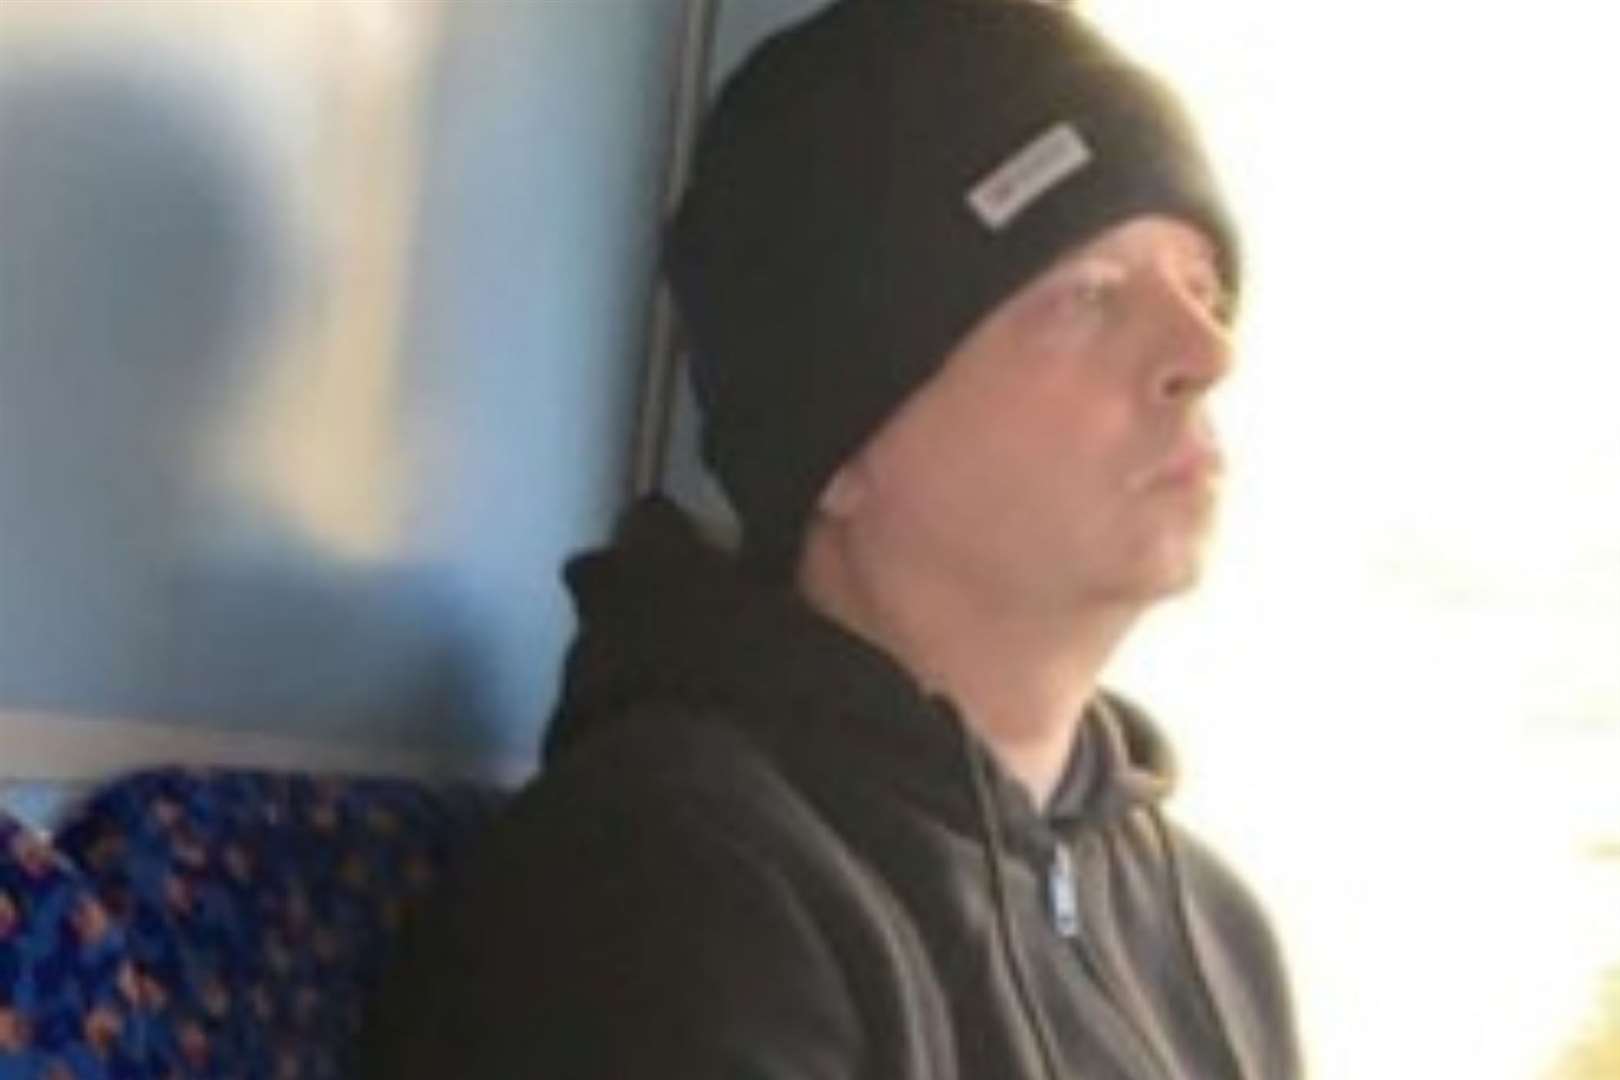 Police want to speak to this man about inappropriate behaviour on a bus. Photo: Kent Police